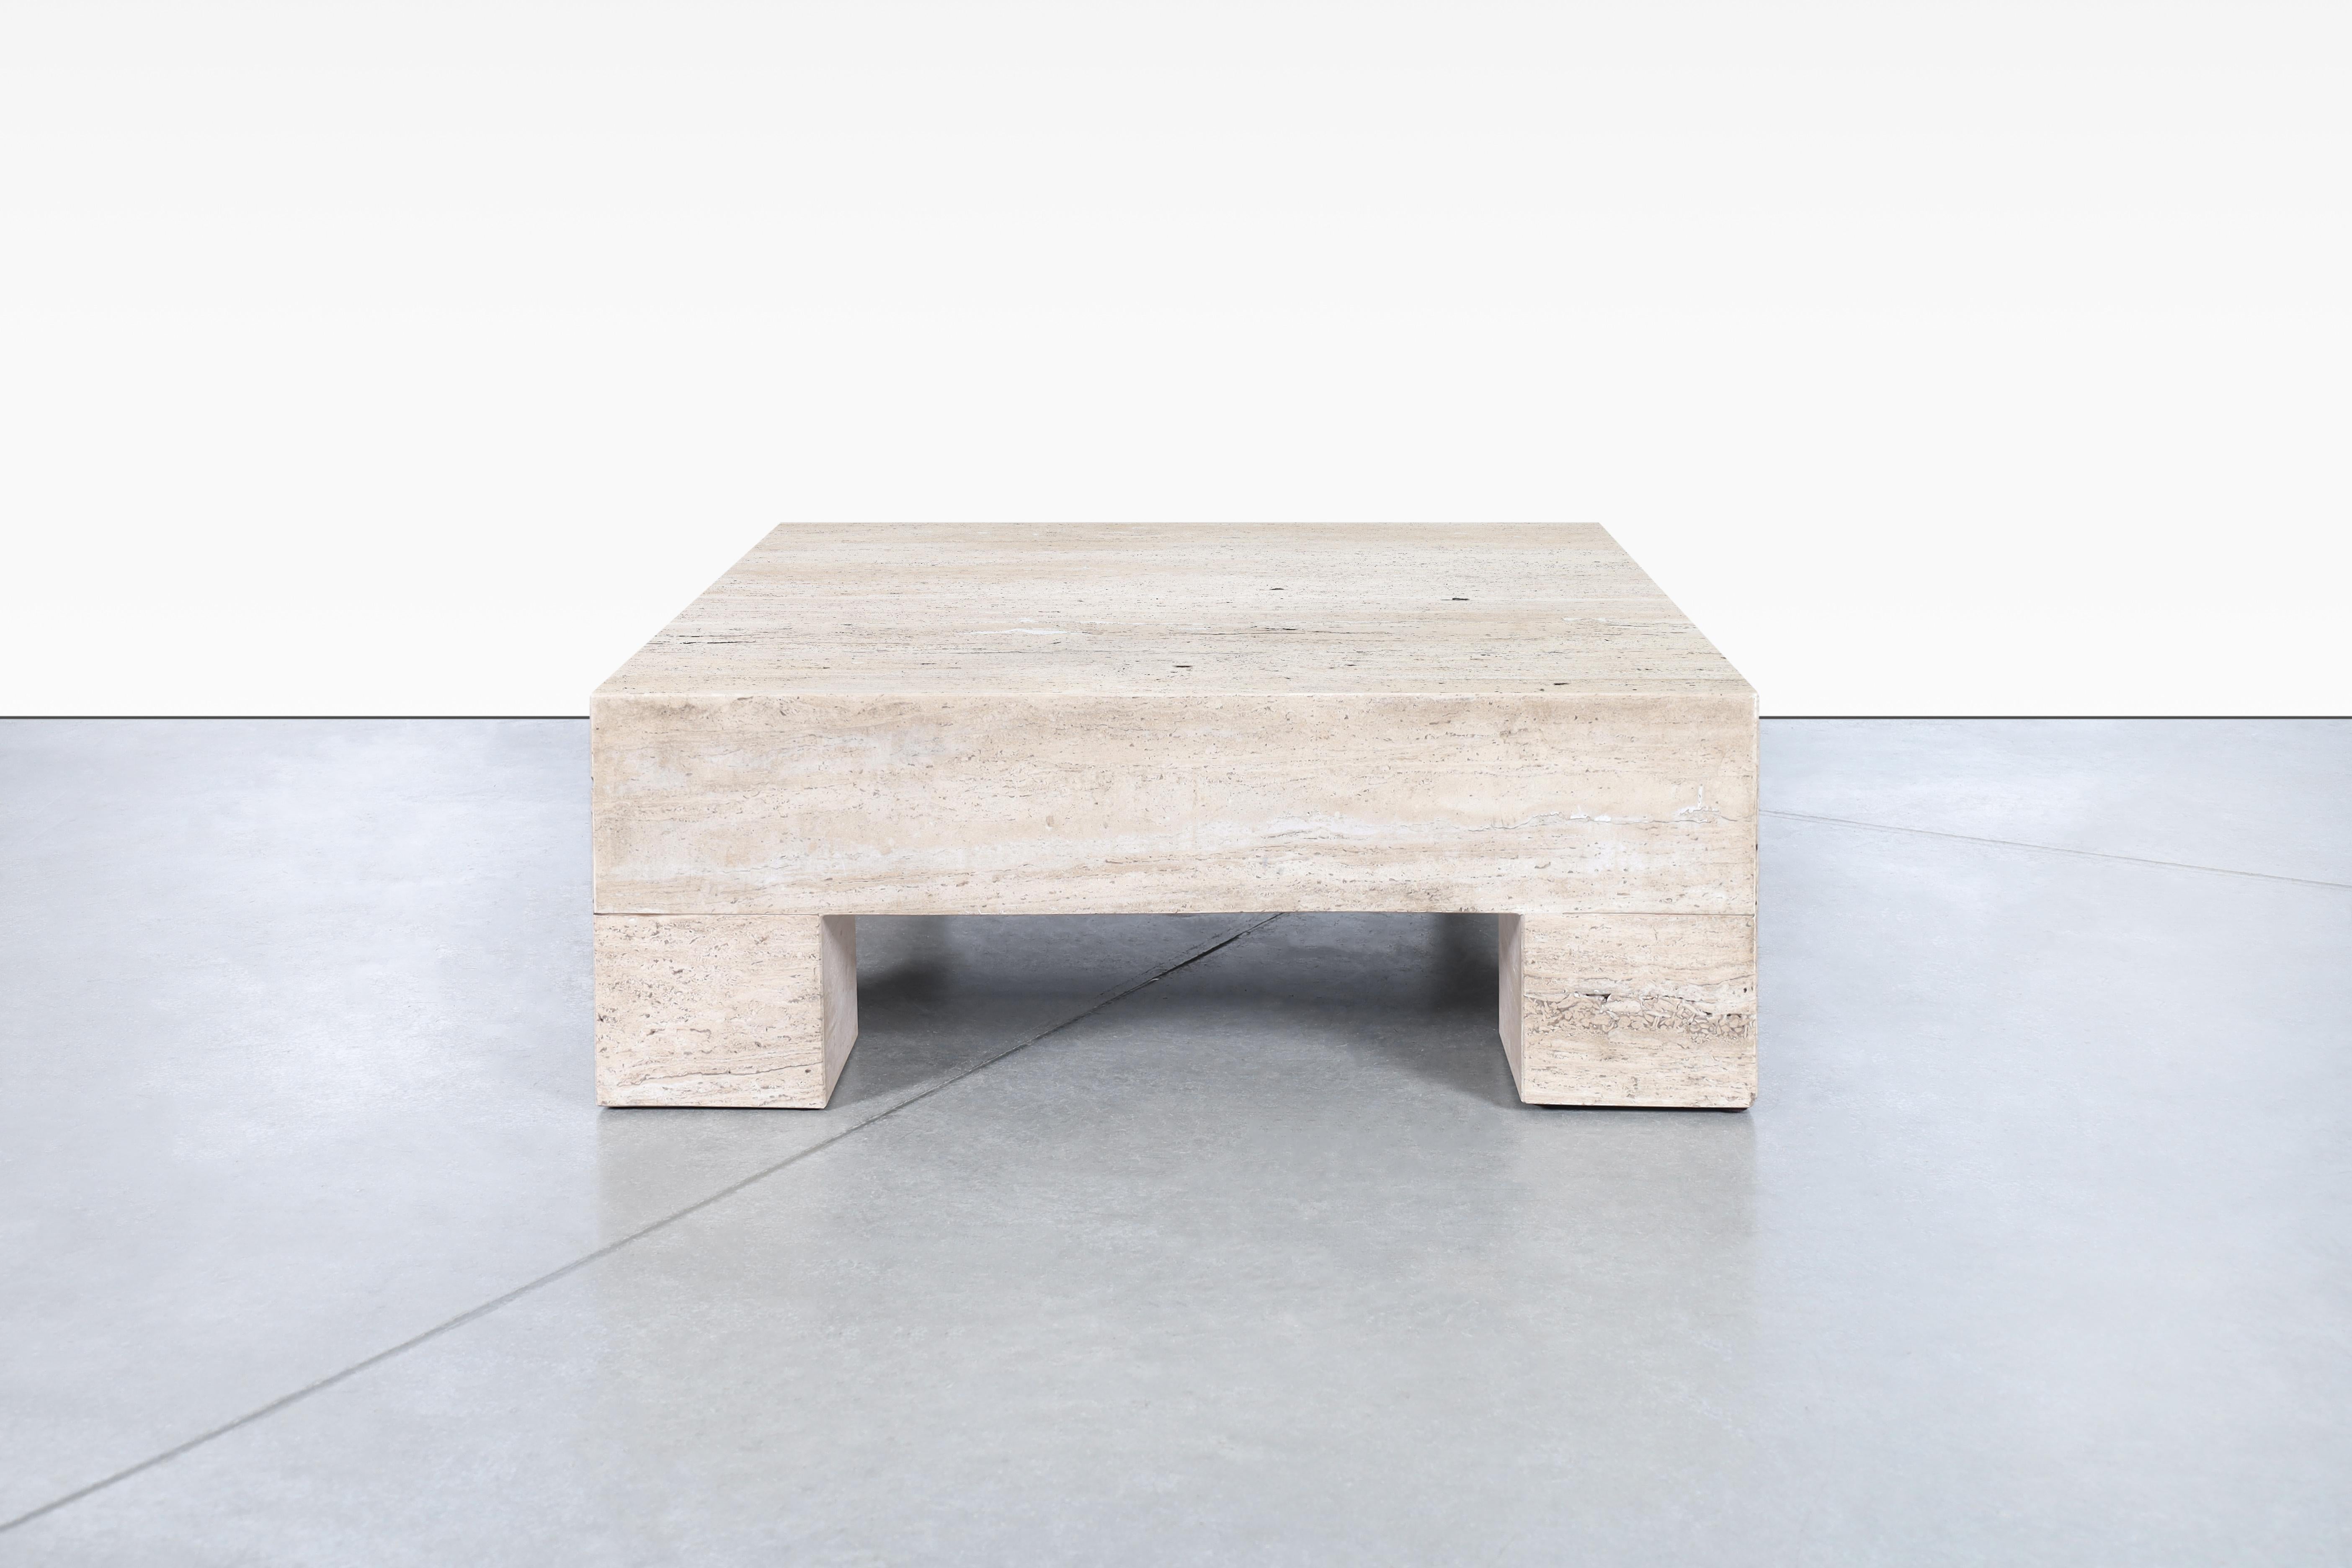 Vintage monumental Italian travertine coffee table designed in Italy, circa 1970s. The combination of the natural minerals that make up the travertine stone flows beautifully through the table. The table features a thick square travertine top and is